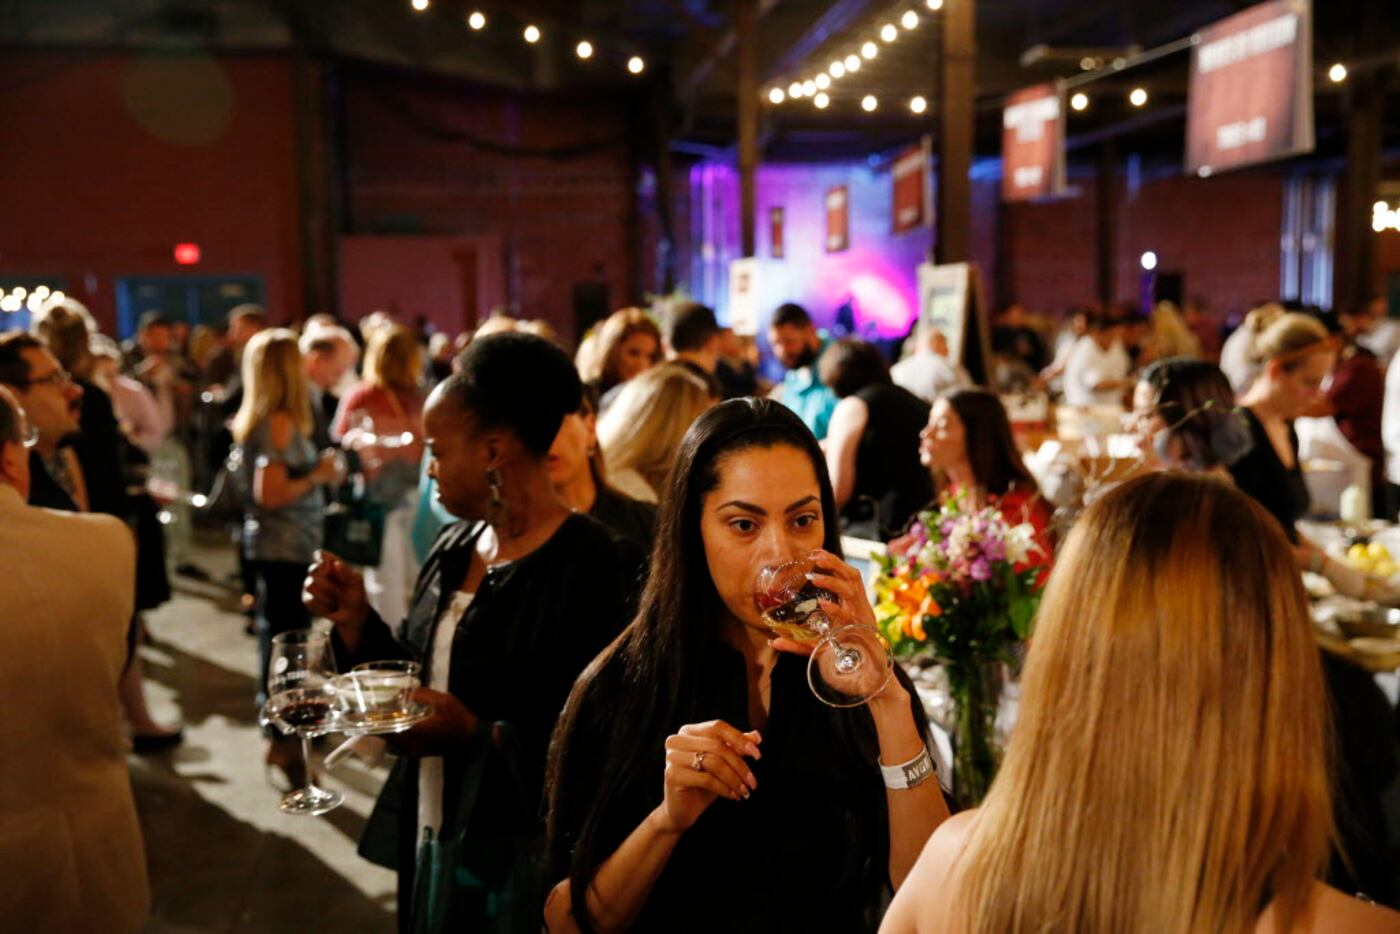 Nena Mendez, of Dallas, tastes wine from R&R Selections during the Grand Tasting event at...